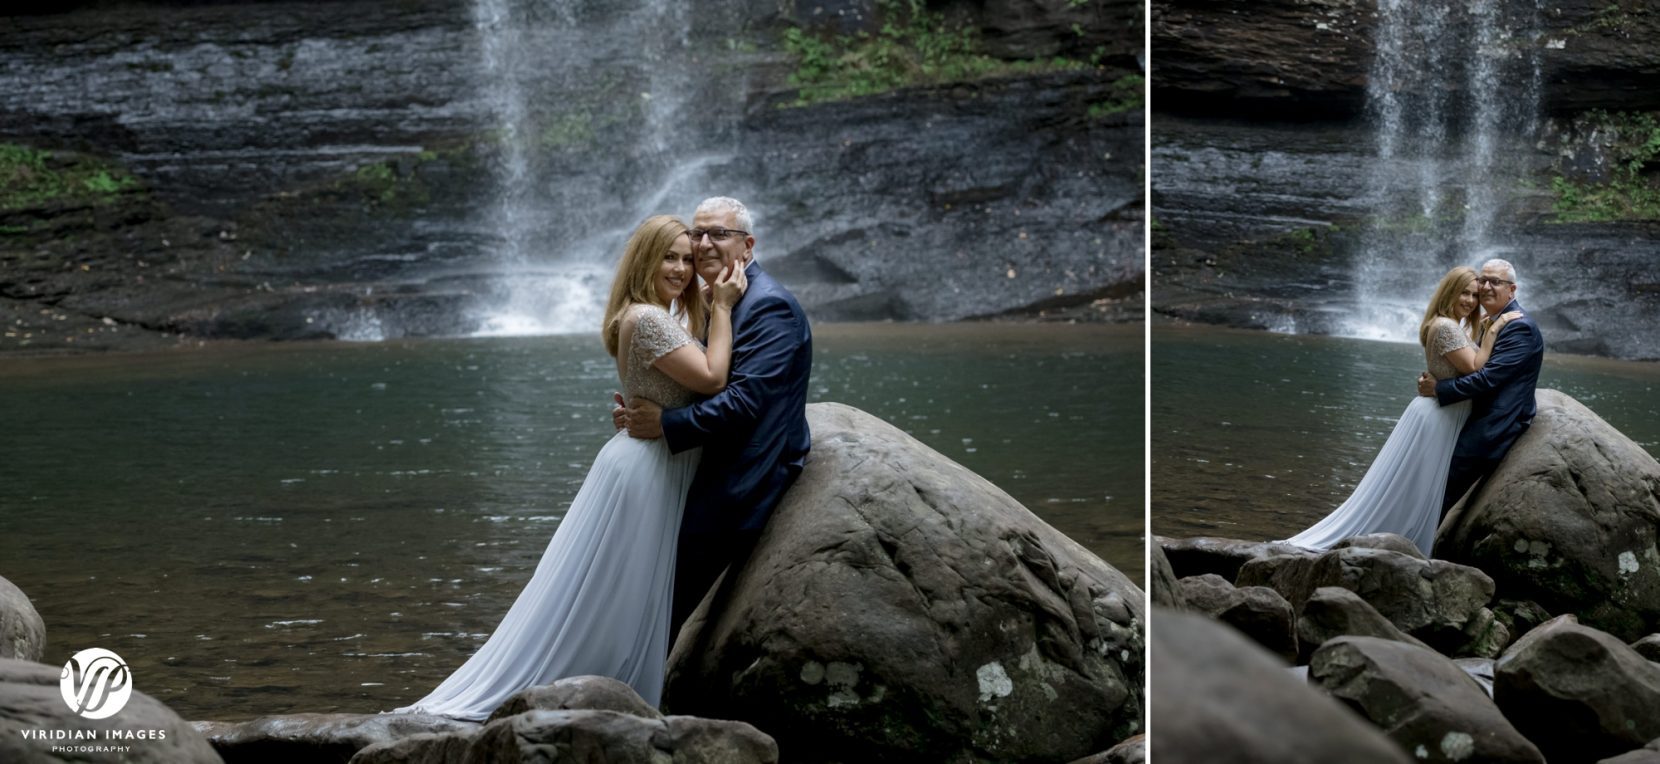 bride and groom photo in waterfall at cloudland canyon